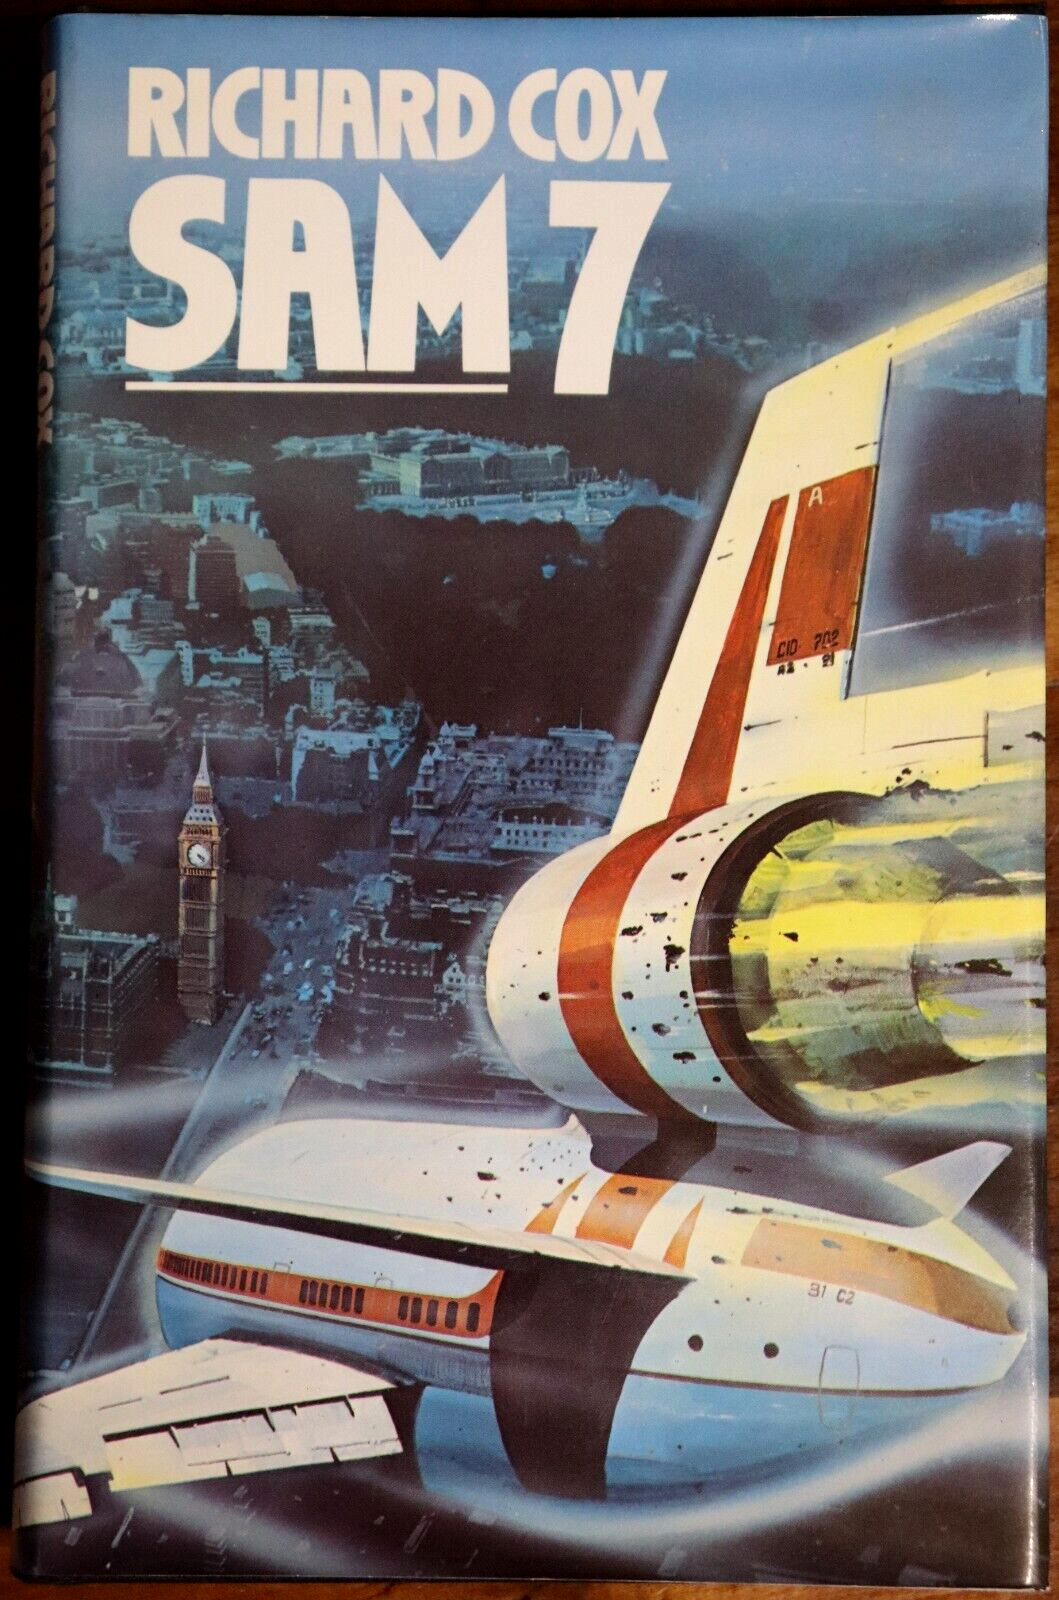 Sam 7 by Richard Cox - 1977 - Vintage Airline Disaster Fiction Book